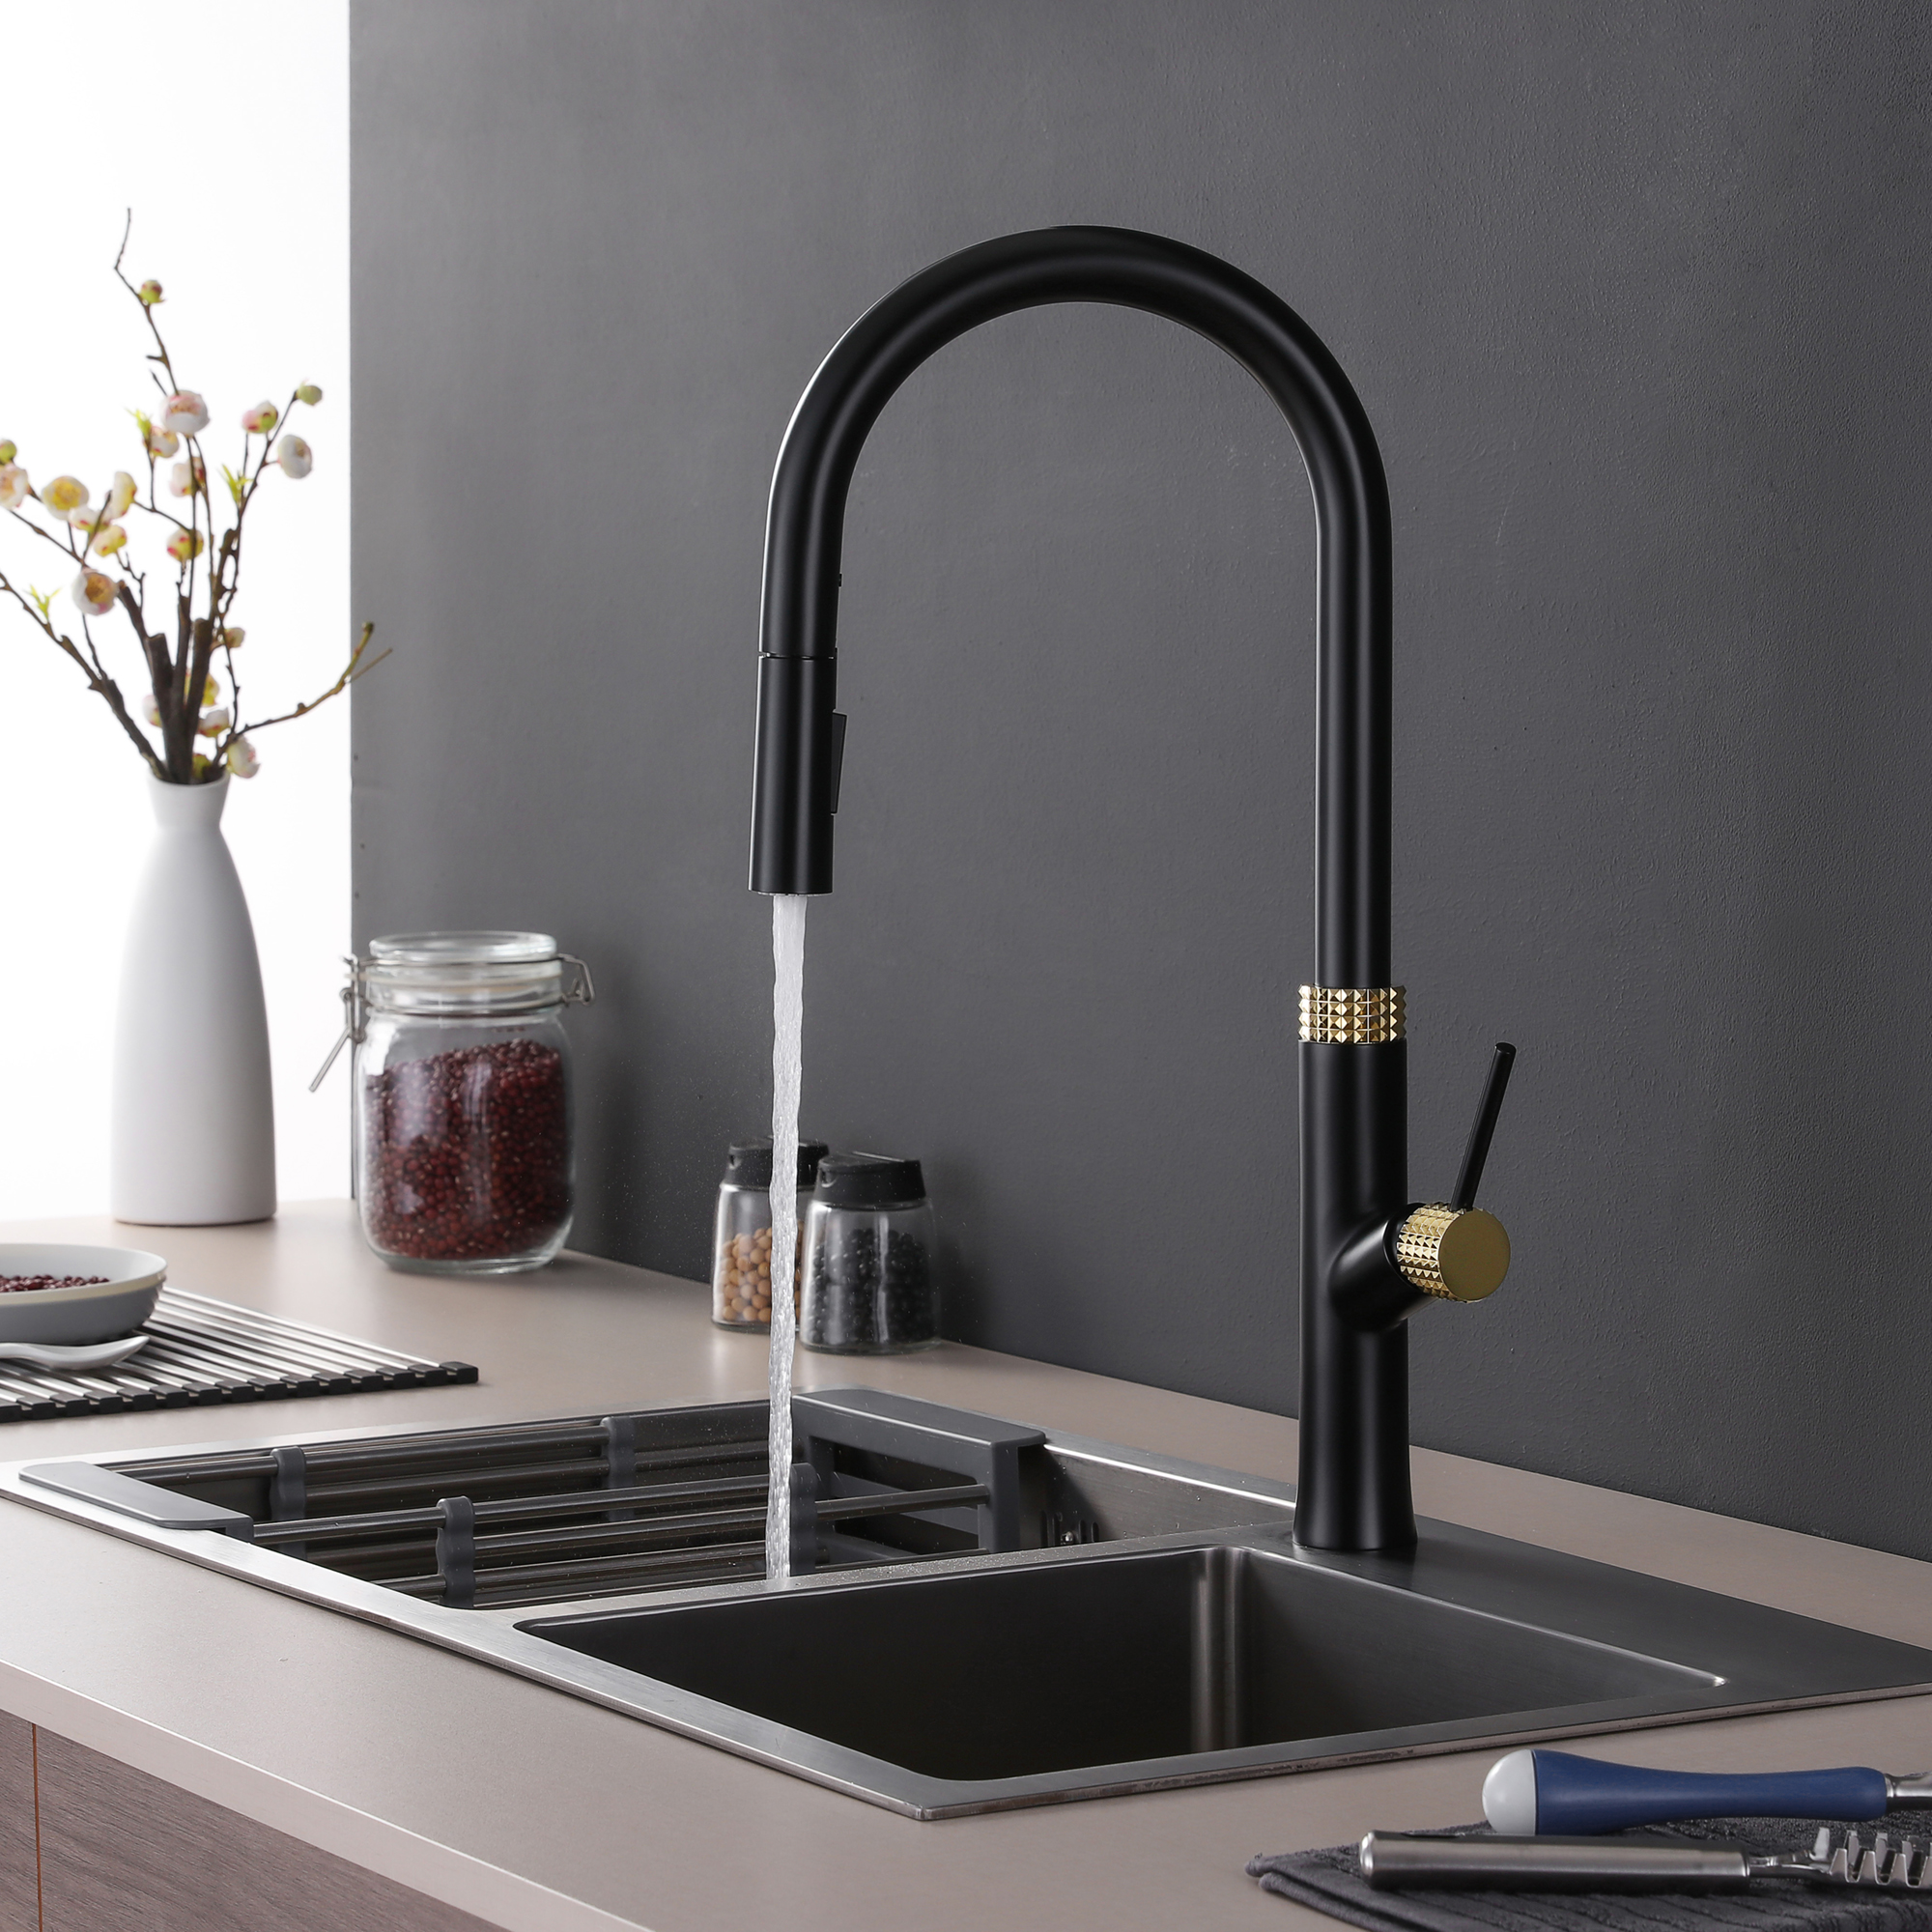 Gowo Water Black Mixer Tap Matt Gold Kitchen Faucet With Great Price